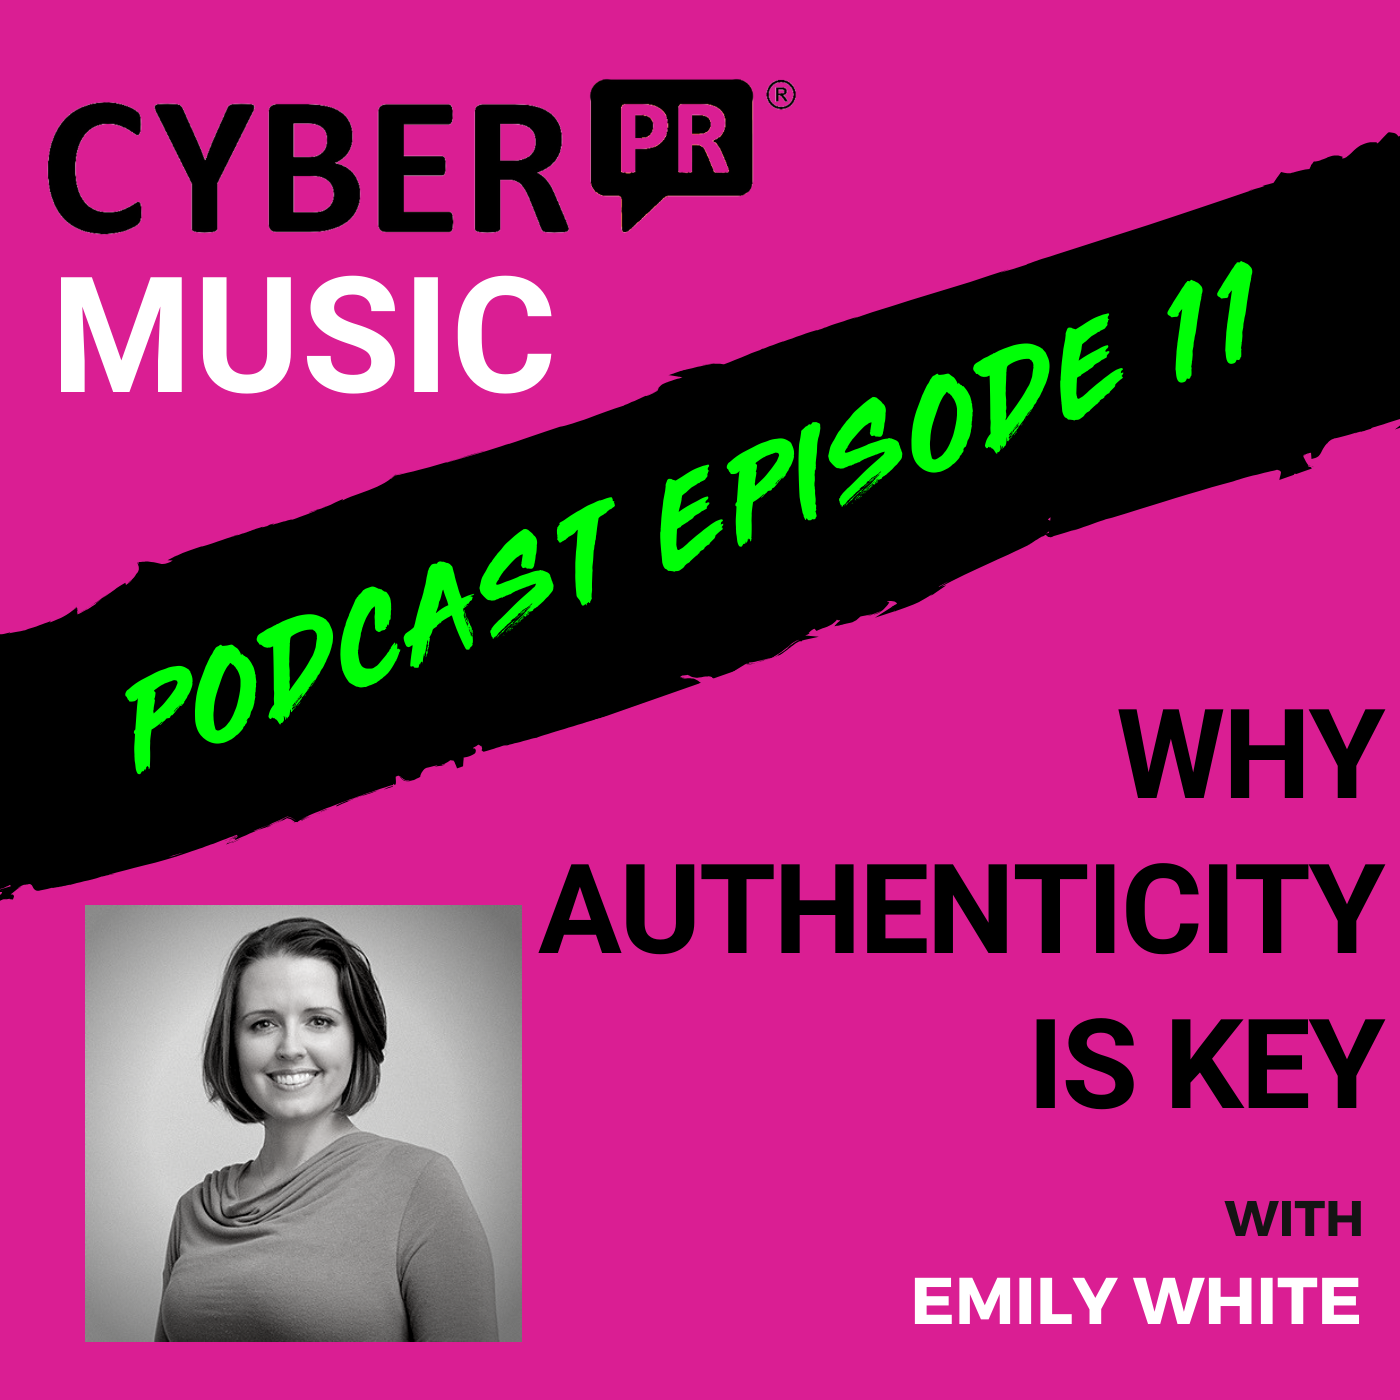 The Cyber PR Music Podcast EP 11: Why Authenticity is Key with Emily White